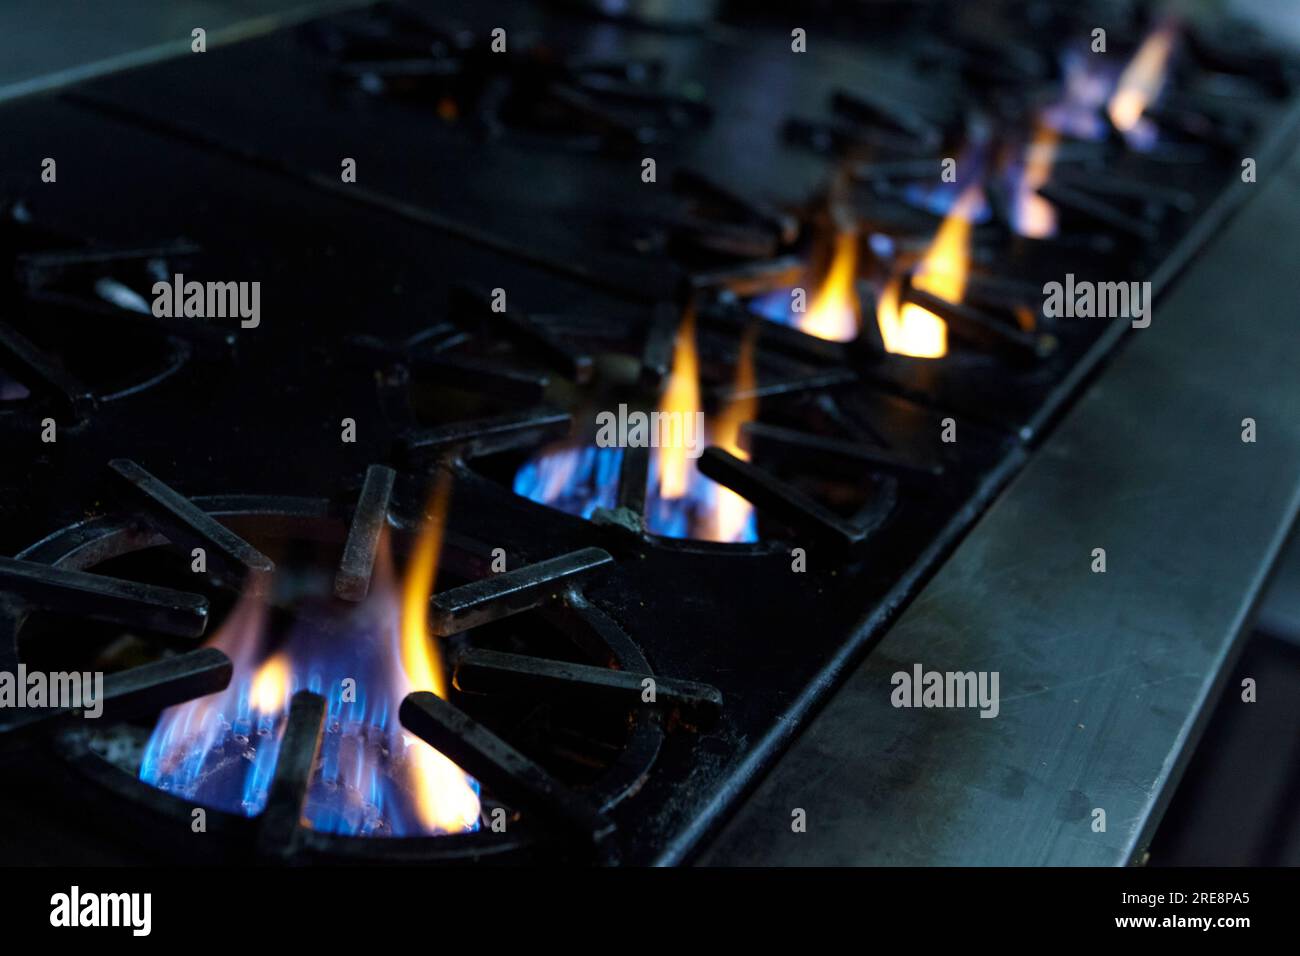 5 gas burners lit in a restaurant kitchen Stock Photo